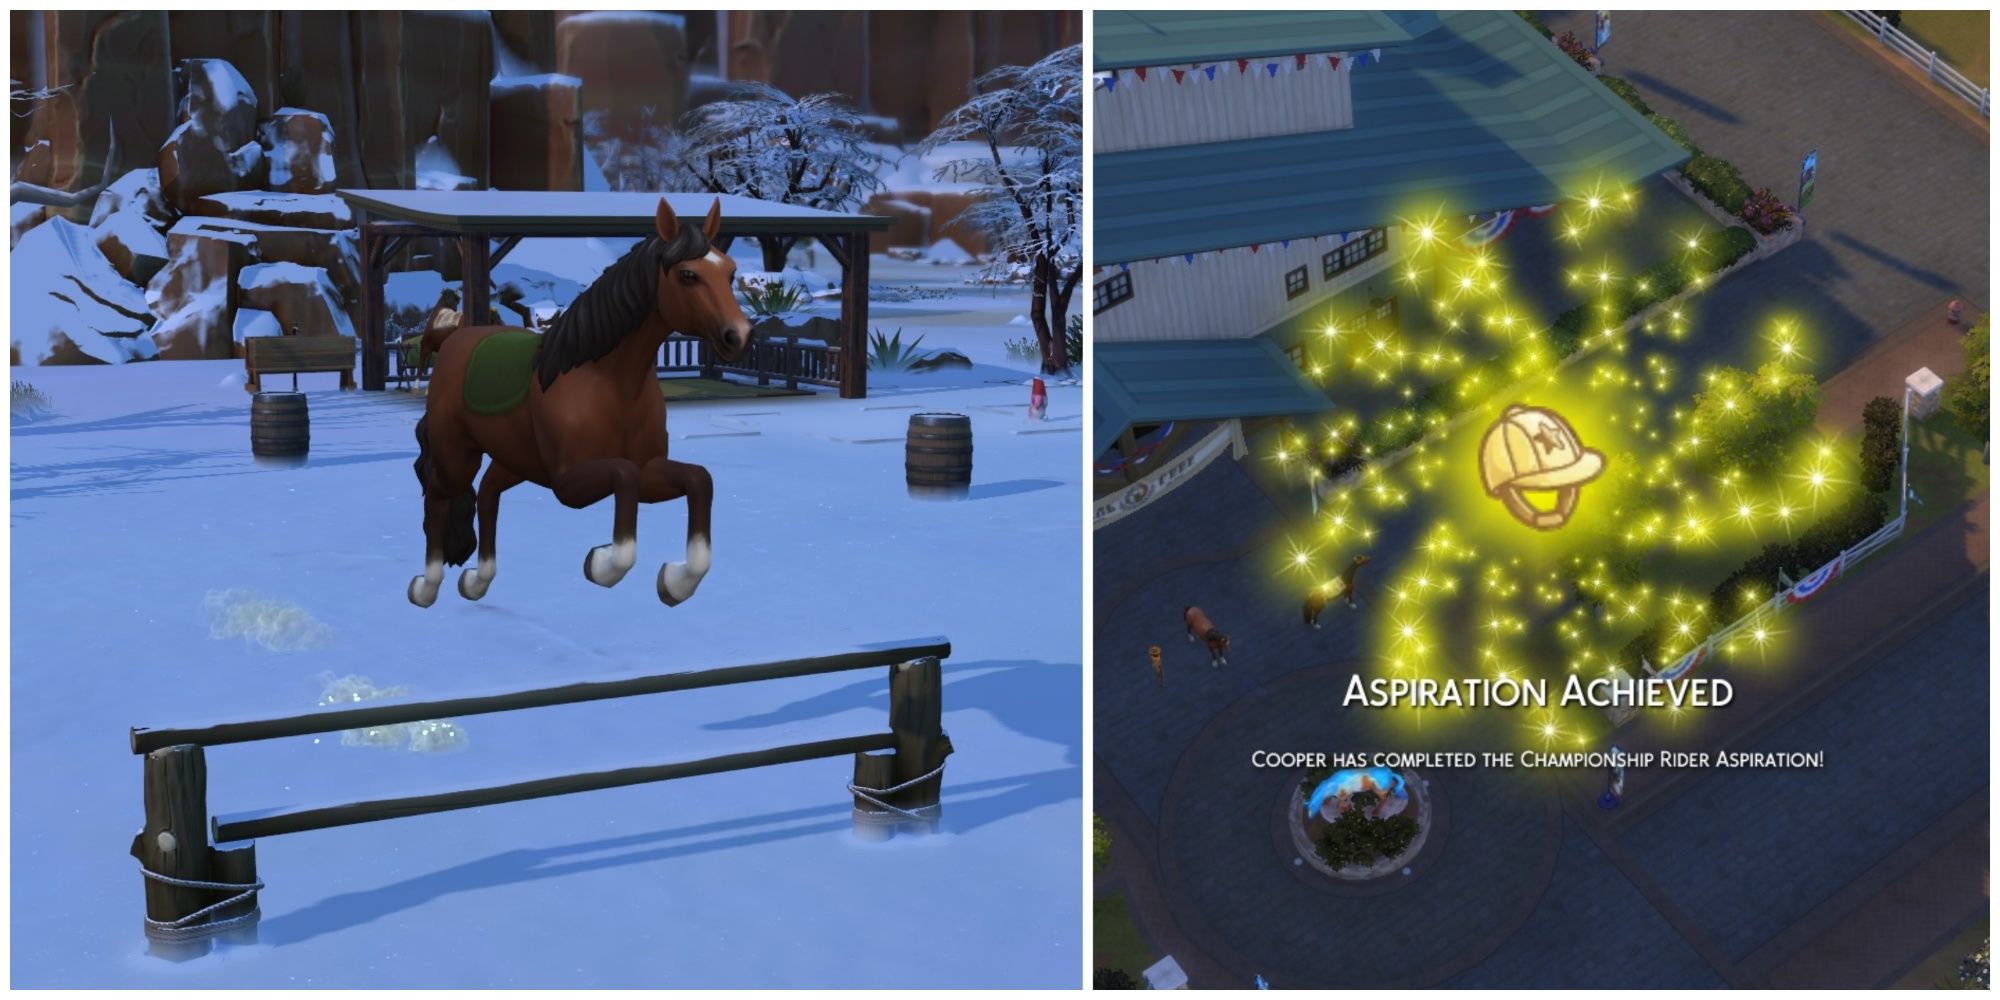 How To Max Horse Riding Skill Cheat (Level Up Skills Cheats) - The Sims 4 